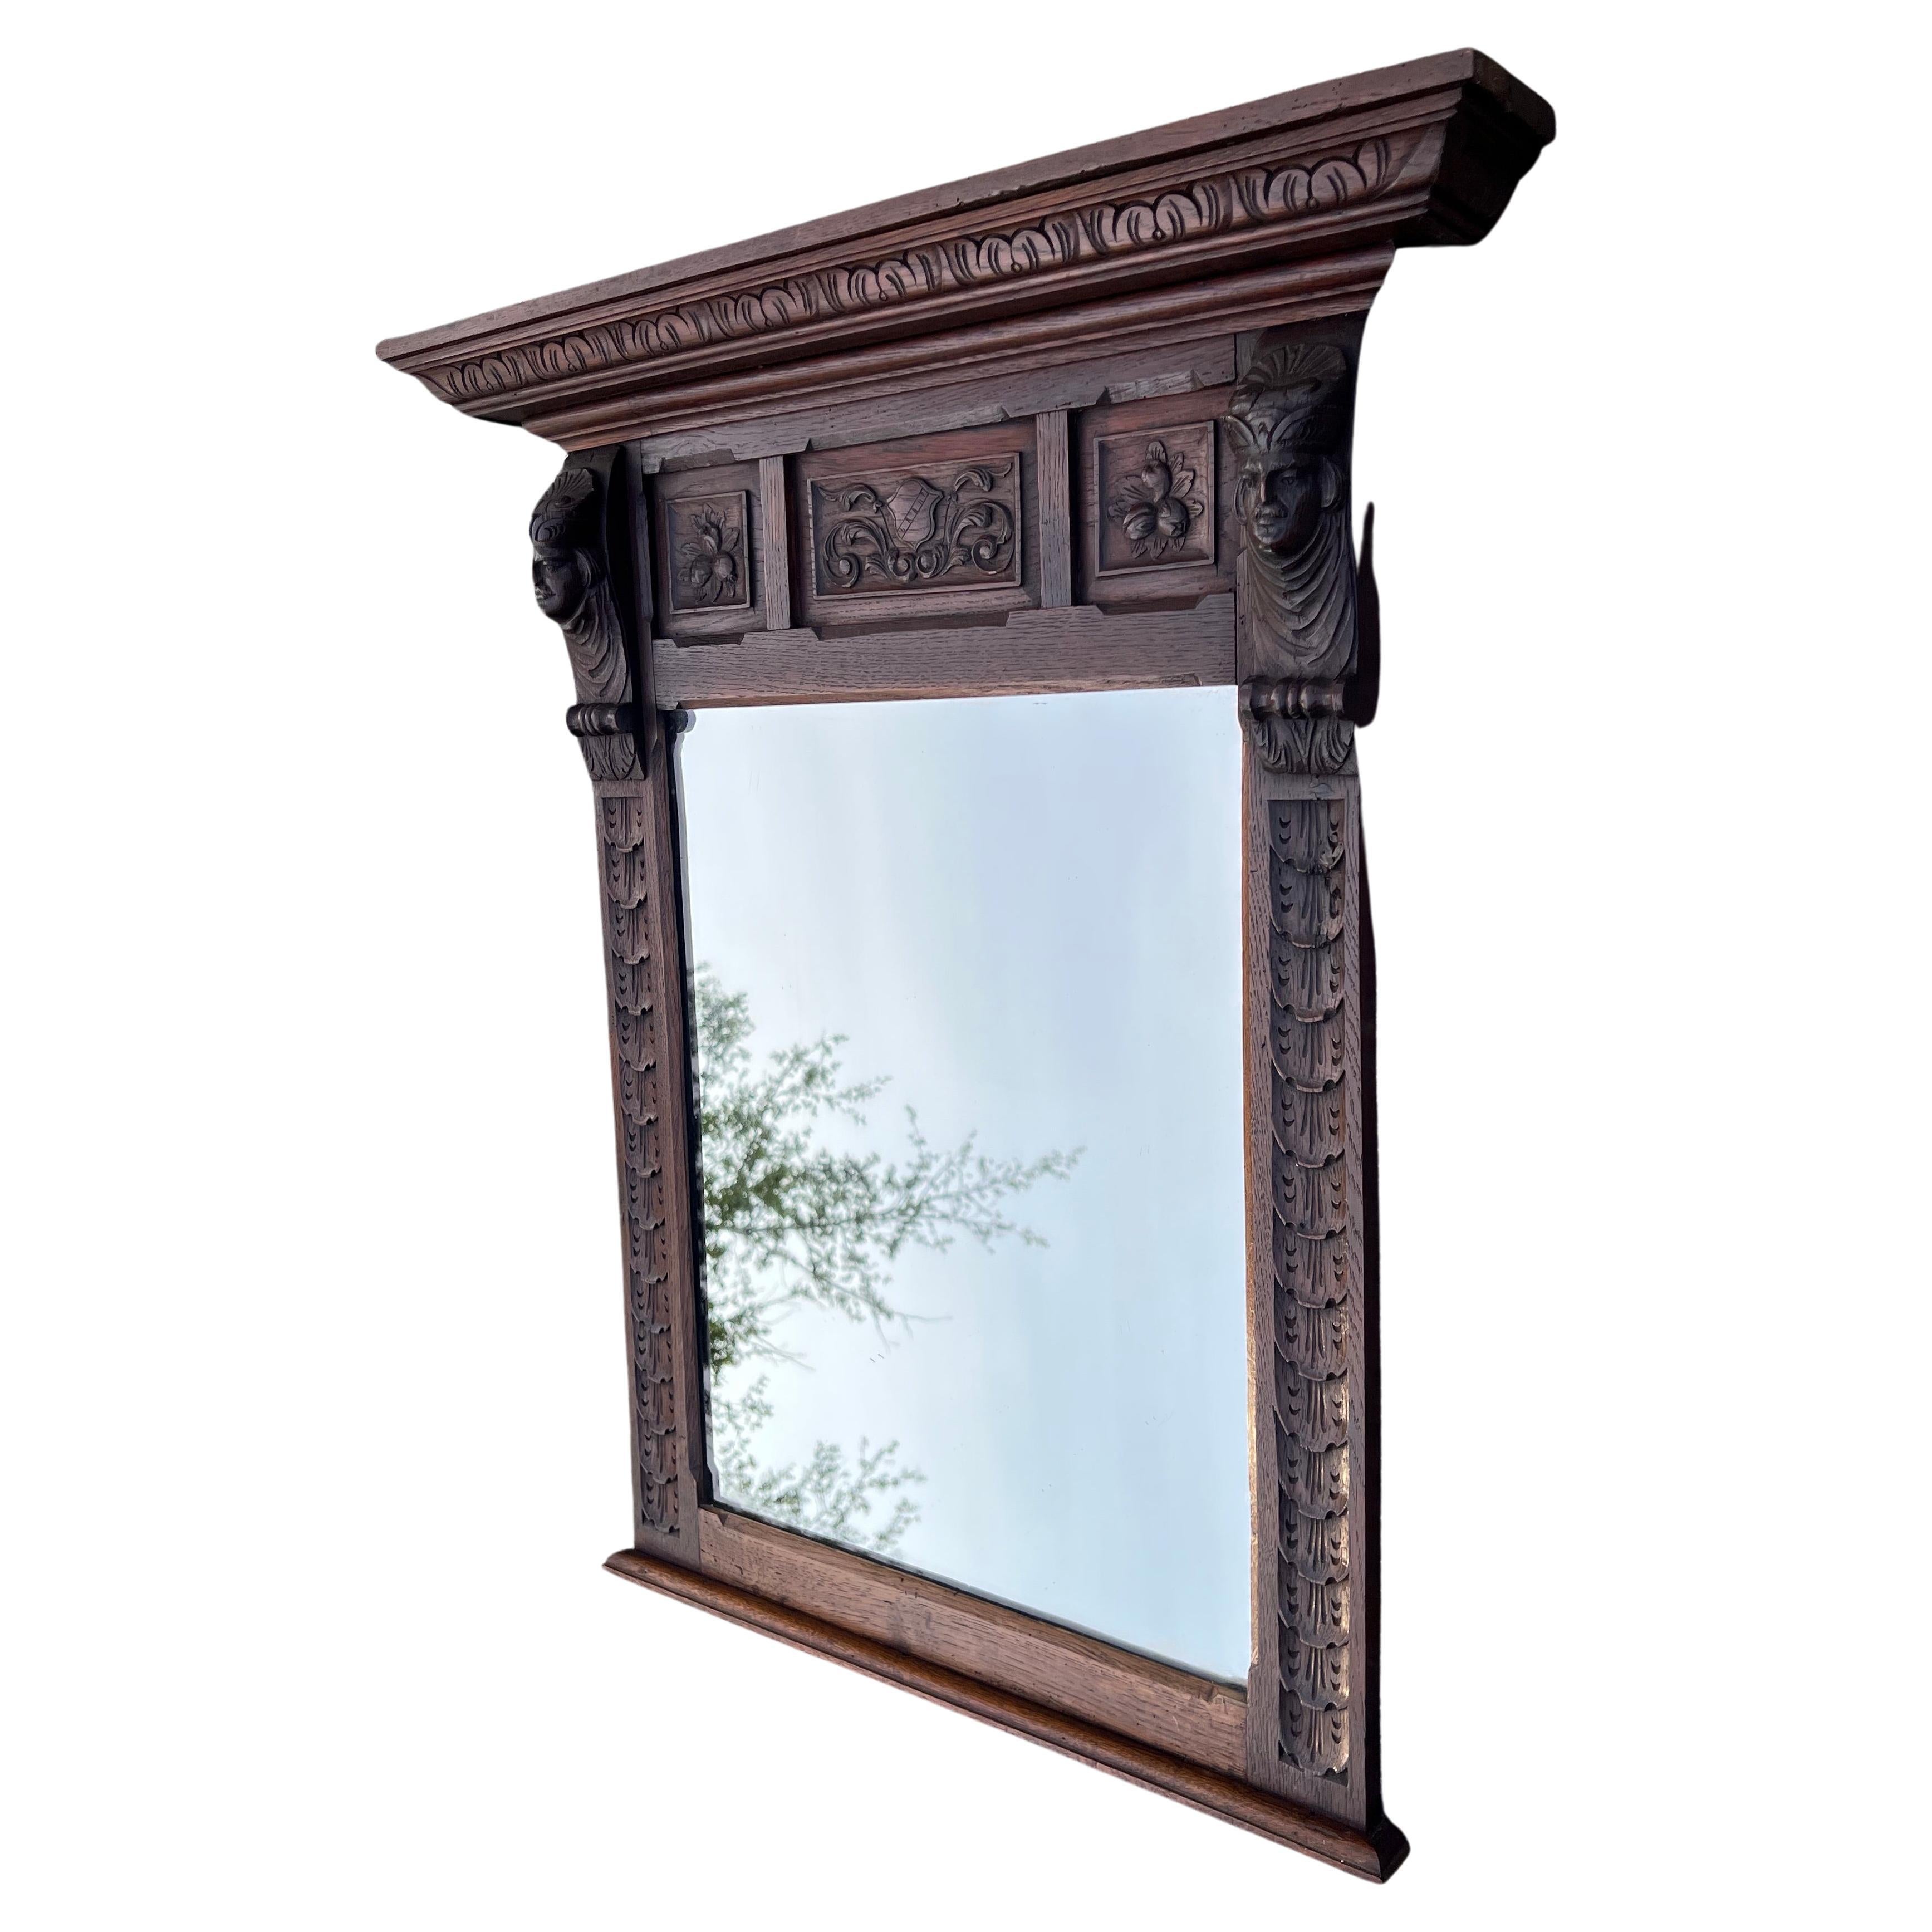 Striking large, Renaissance Revival wall mirror with an amazing patina.

If you are familiar with style elements of the Renaissance era then you will immedidately recognize this practical size antique as a Renaissance Revival piece. In this